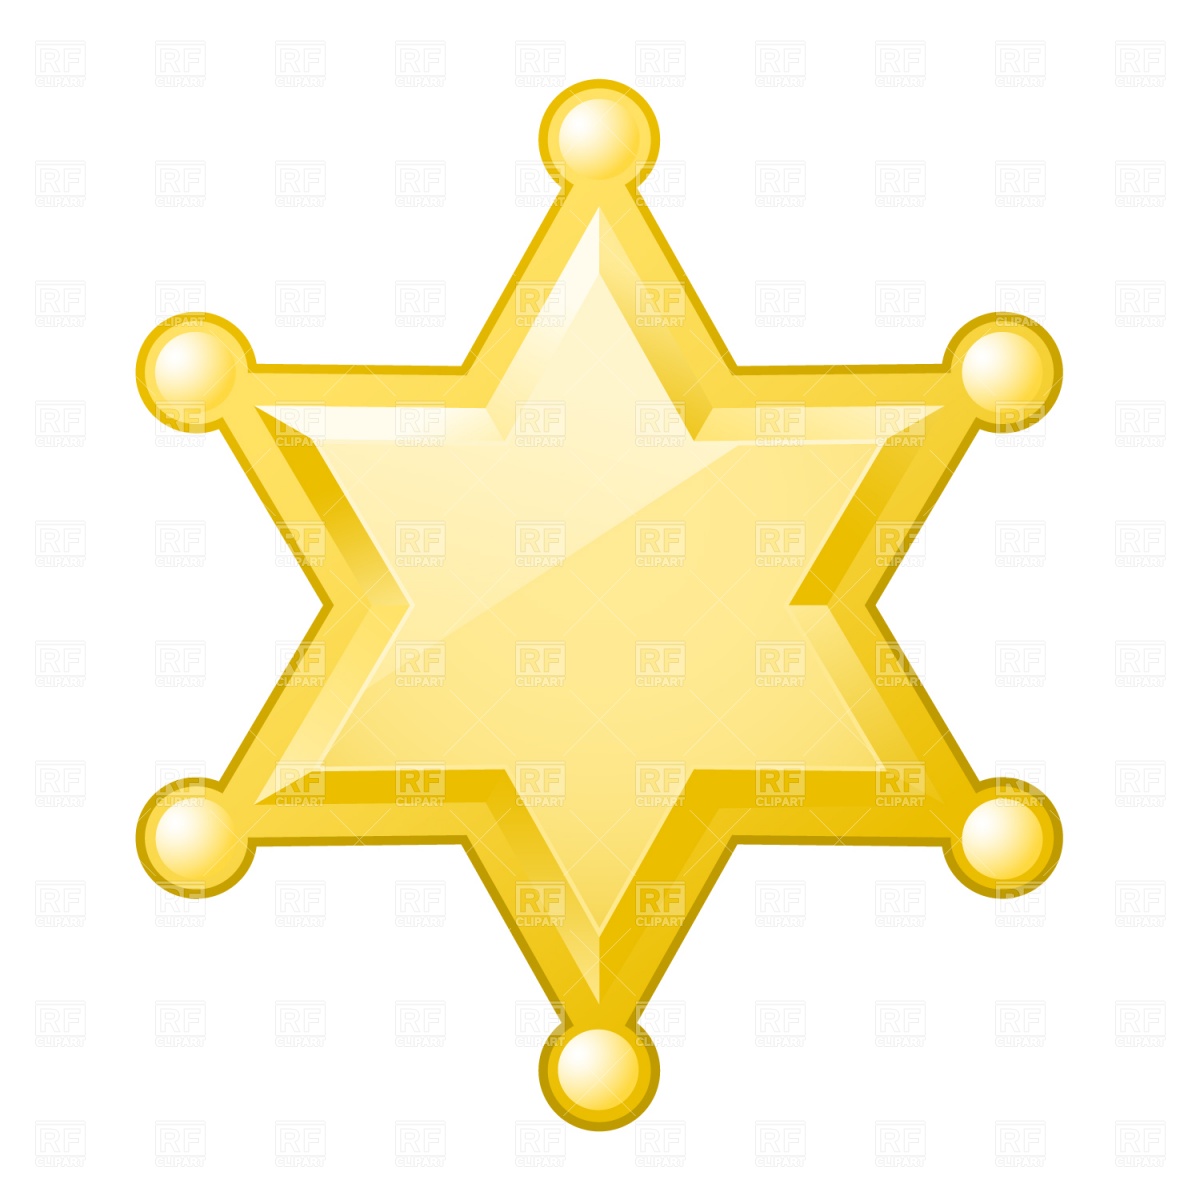 Sheriff Badge Clipart Clipart Suggest